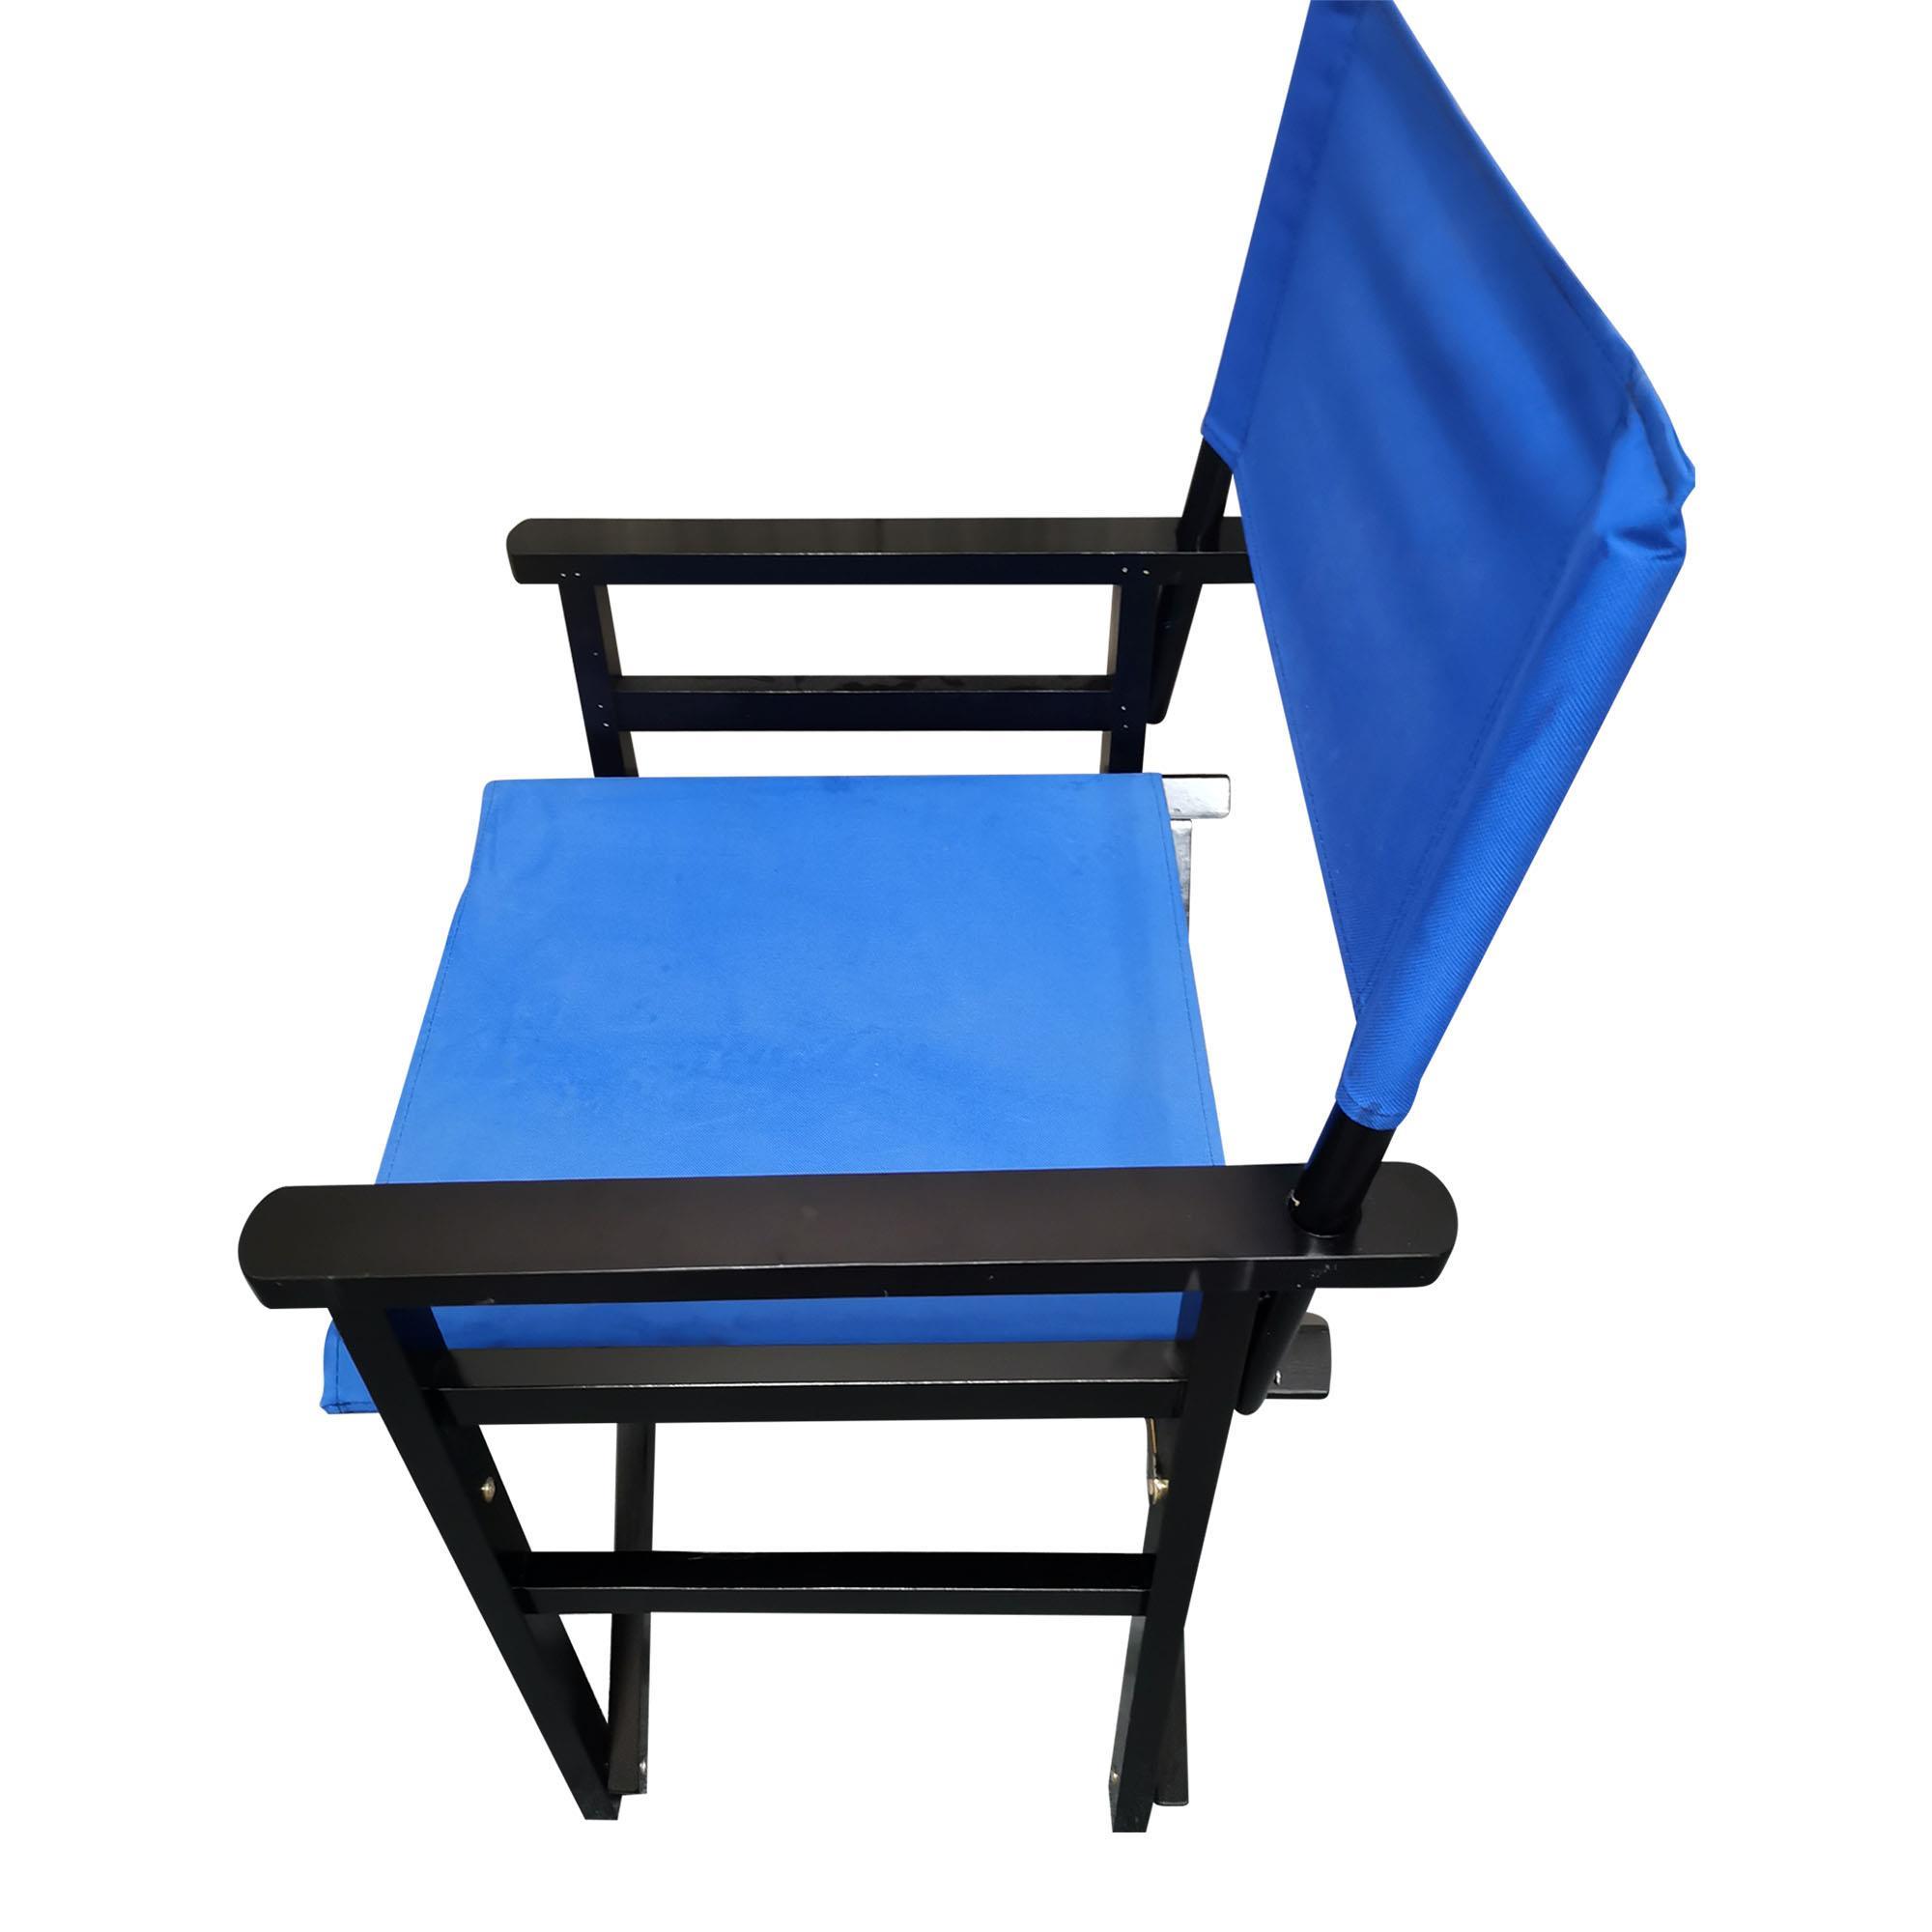 UBesGoo 2 Piece Folding Chair Wooden Director Chair Canvas, Casual Directors Chair, Black Frame-with Blue Canvas - image 5 of 11